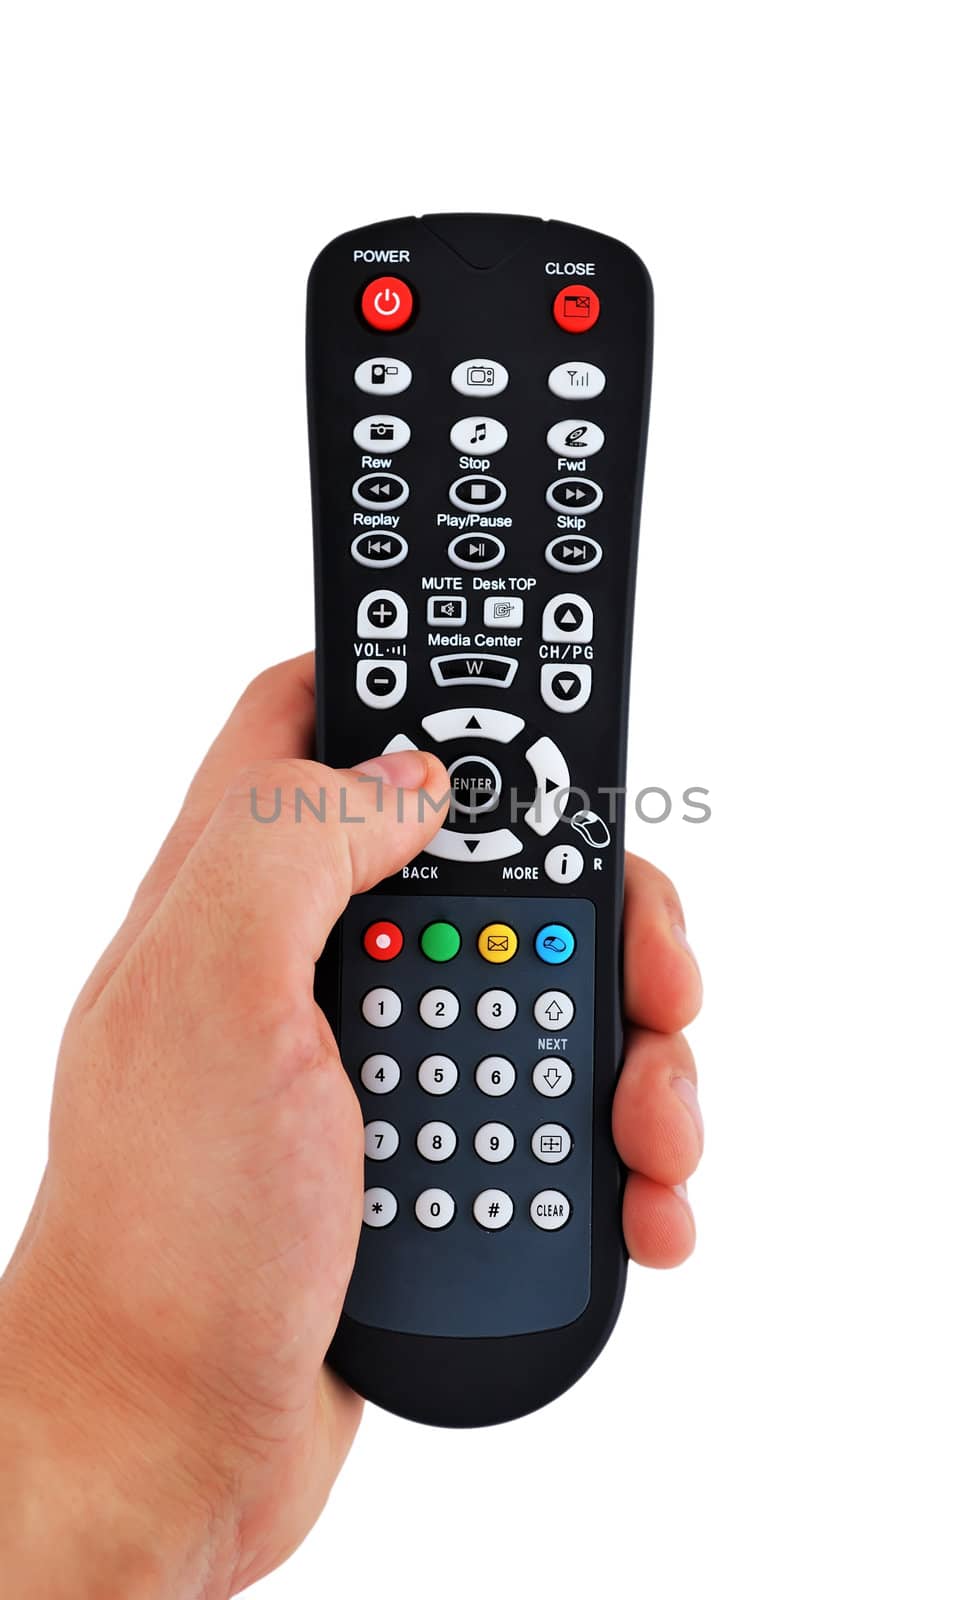 remote control for your computer on a white background